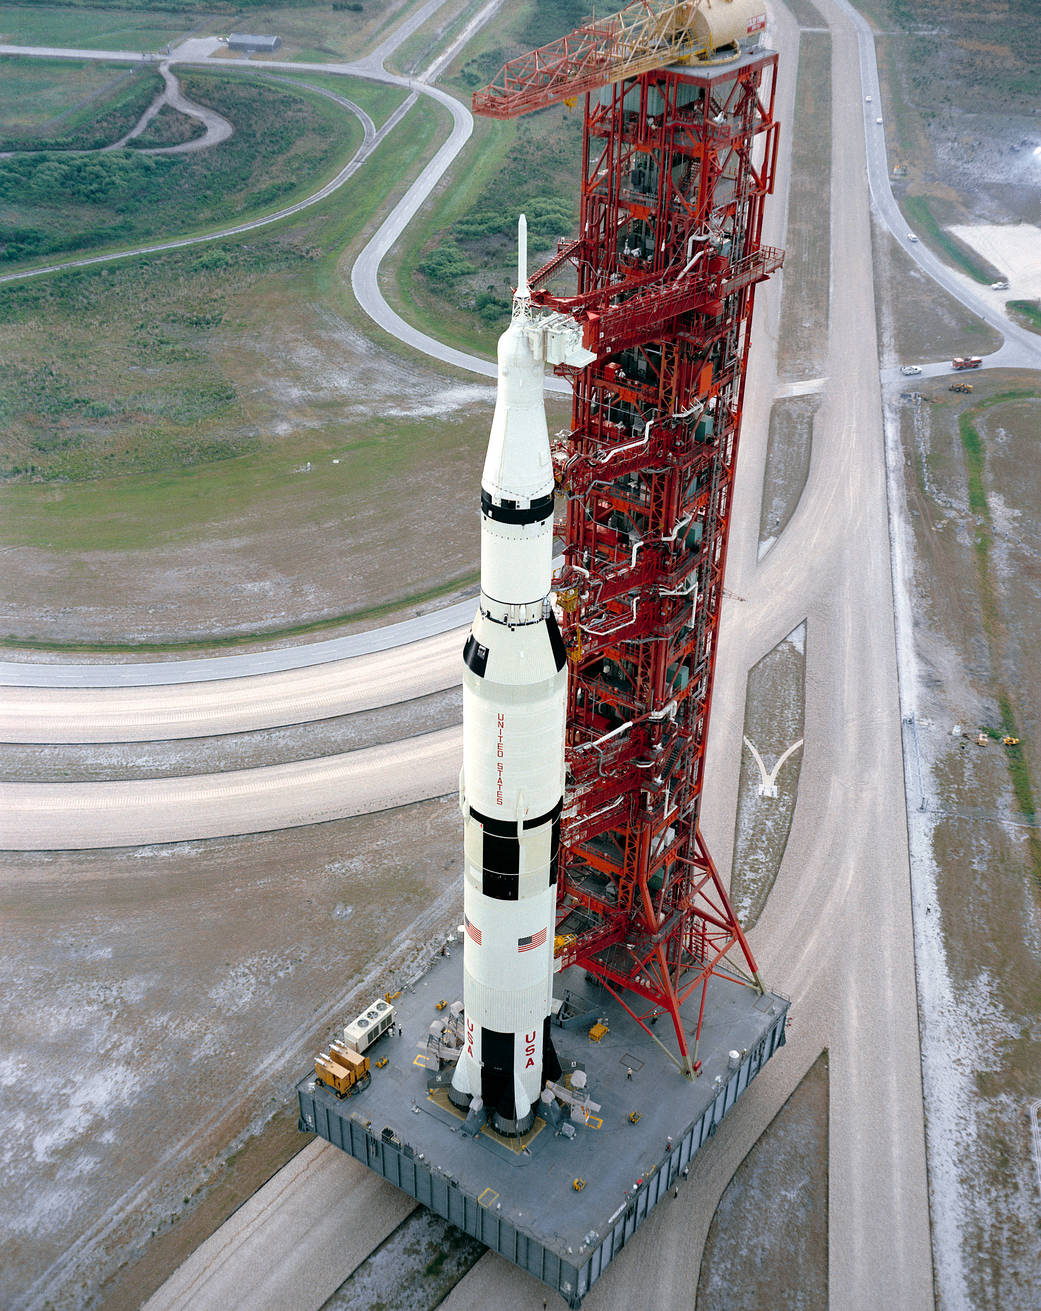 View of the Apollo 15 spacecraft on the Saturn V rocket being rolled out to the launchpad.